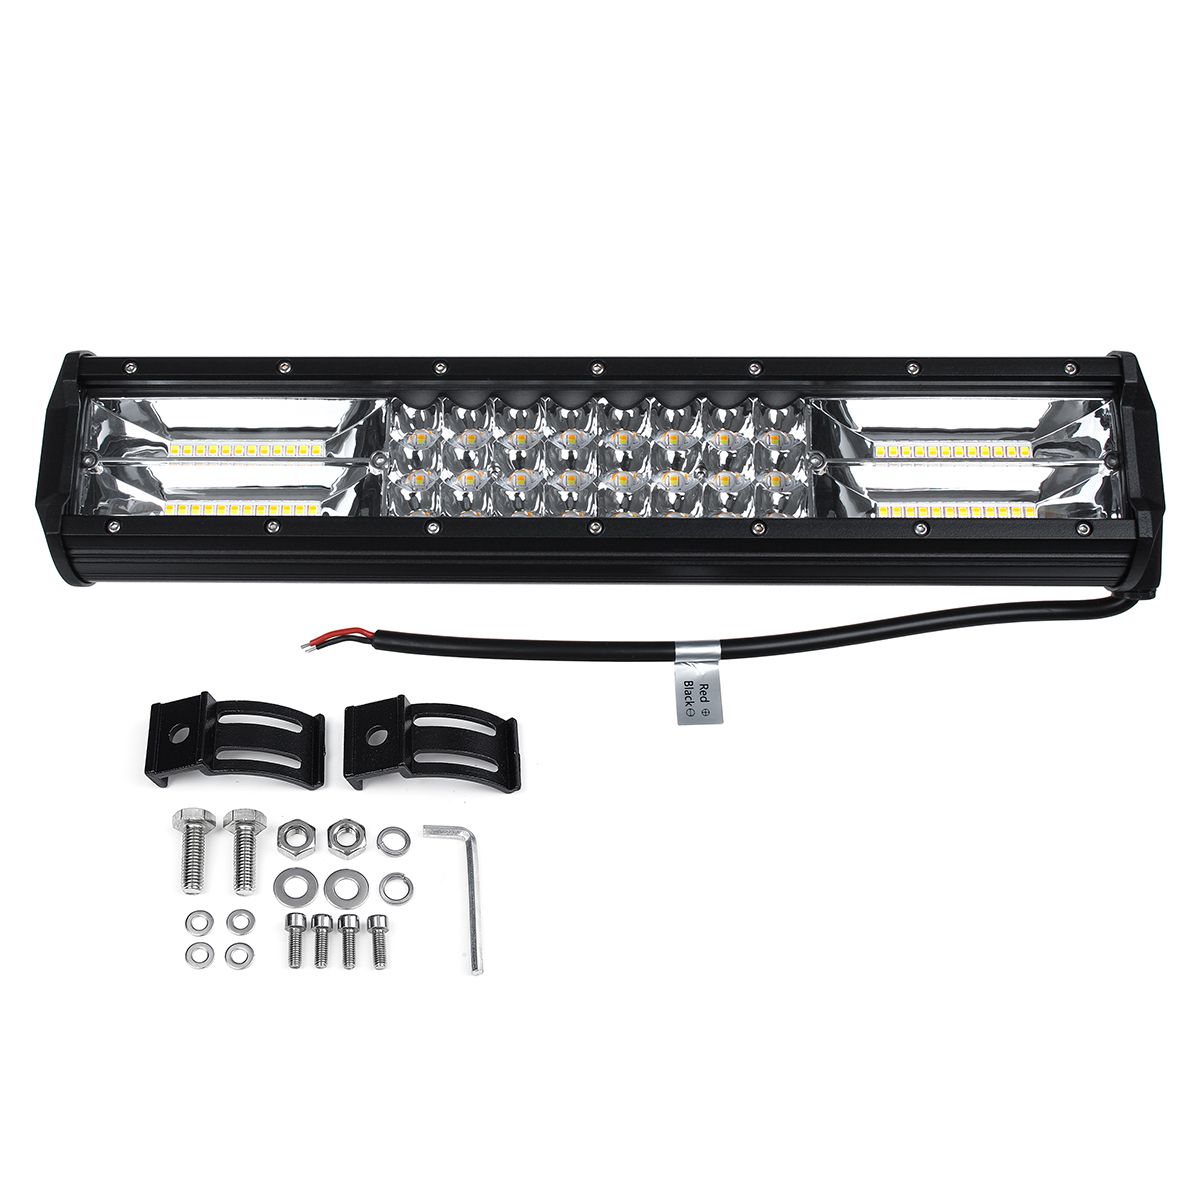 145Inch-216W-LED-Work-Light-Bar-Strobe-Flash-Lamp-Waterproof-Dual-Color-WhiteAmber-10-30V-for-Offroa-1609260